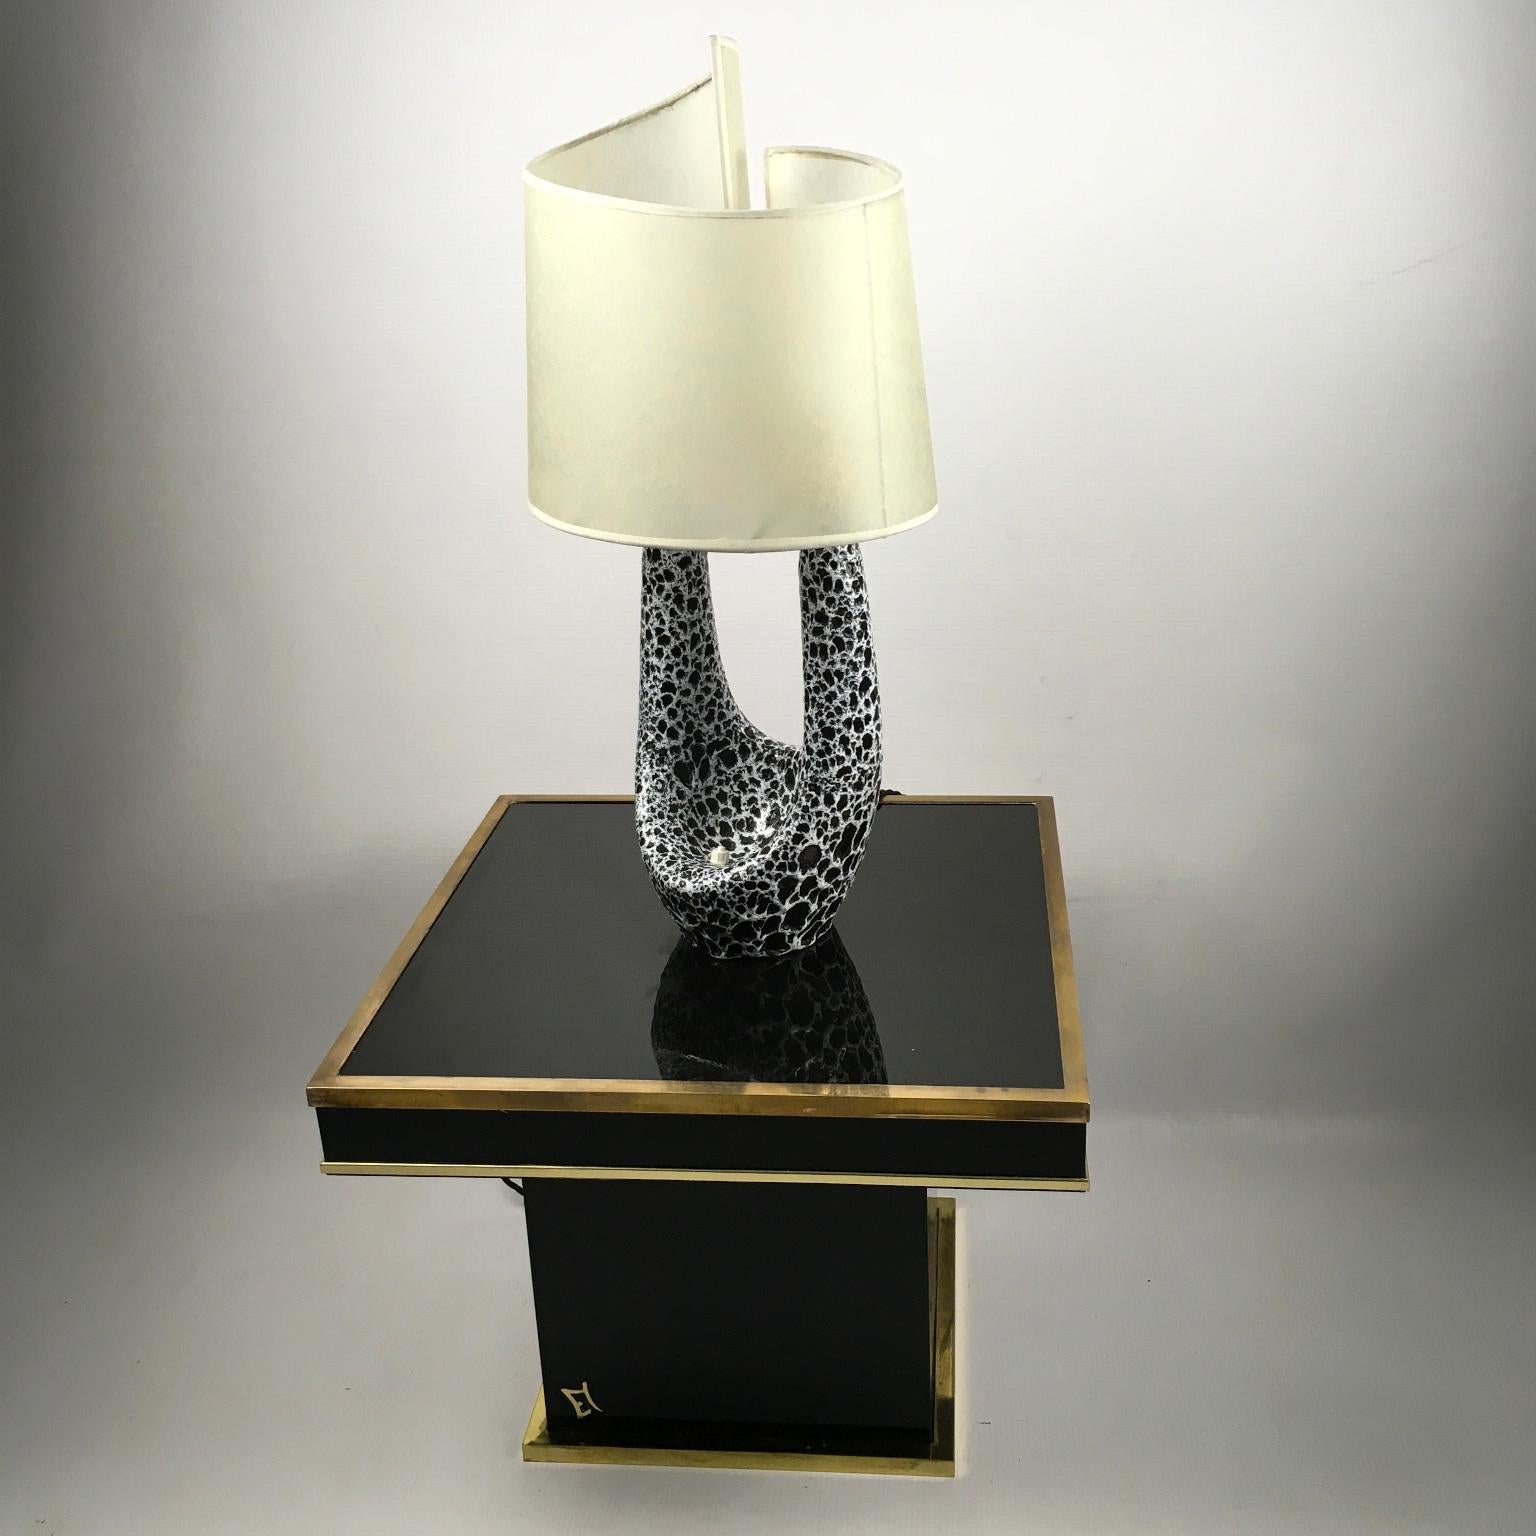 Hand-Crafted Vallauris Ceramic Table Lamp by Le Vaucour 1950's France